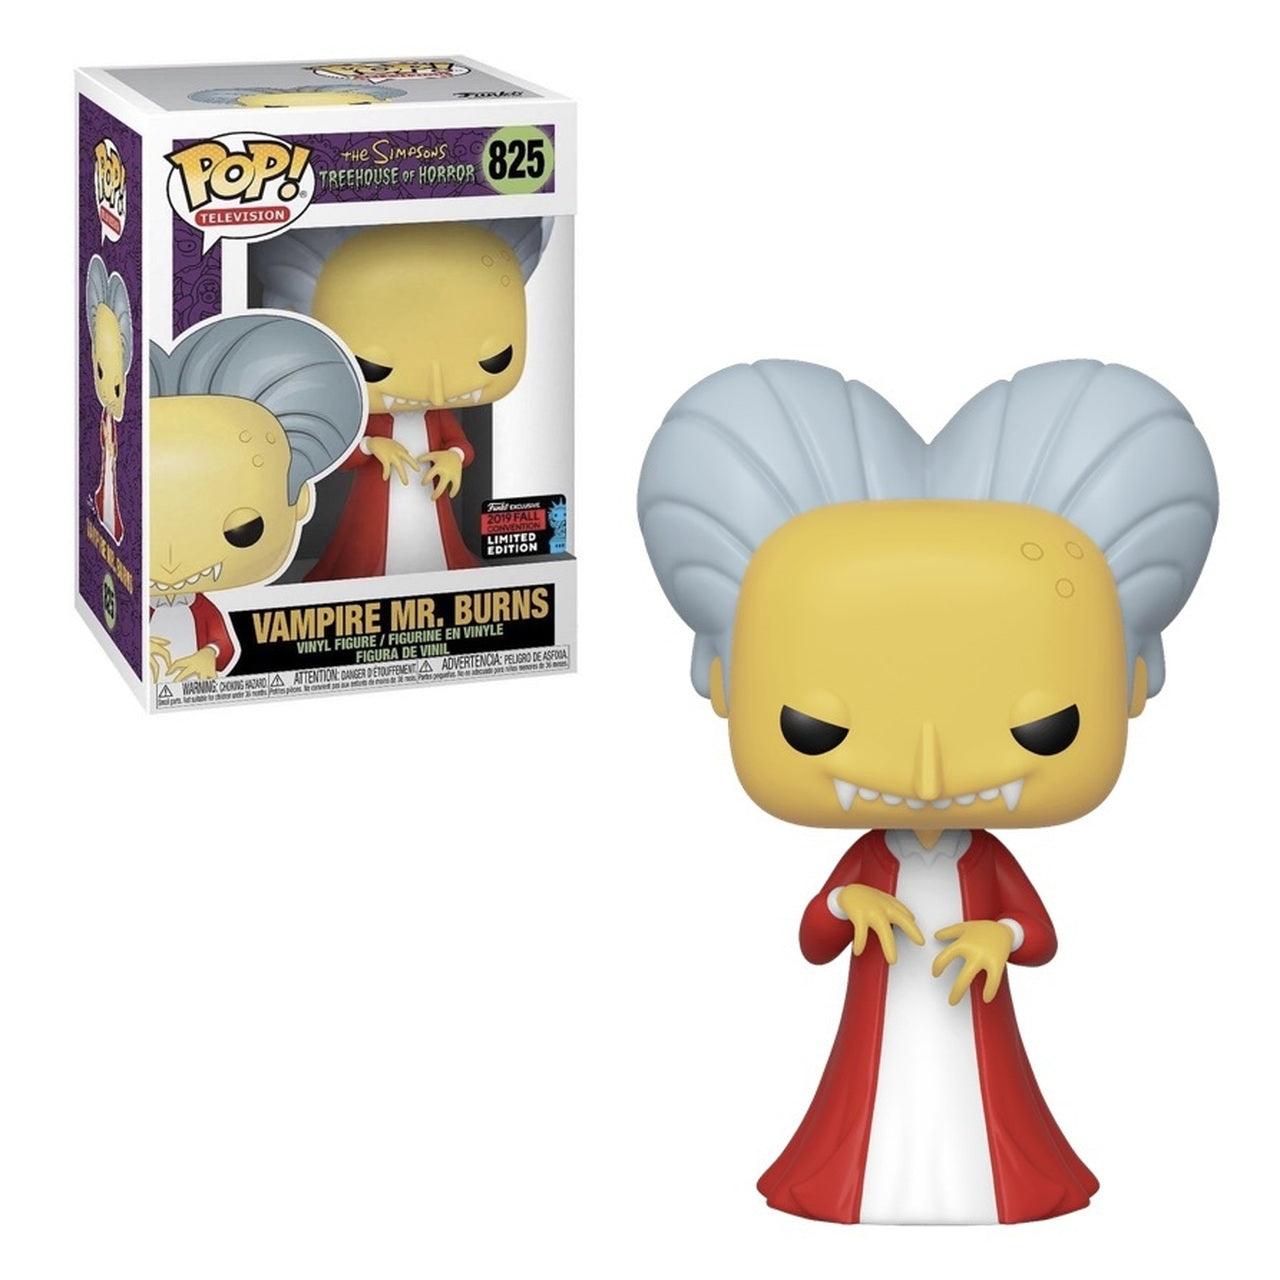 Pop! Television - The Simpsons - #0825 Vampire Mr. Burns - 2019 New York Fall Convention EXCLUSIVE - Hobby Champion Inc